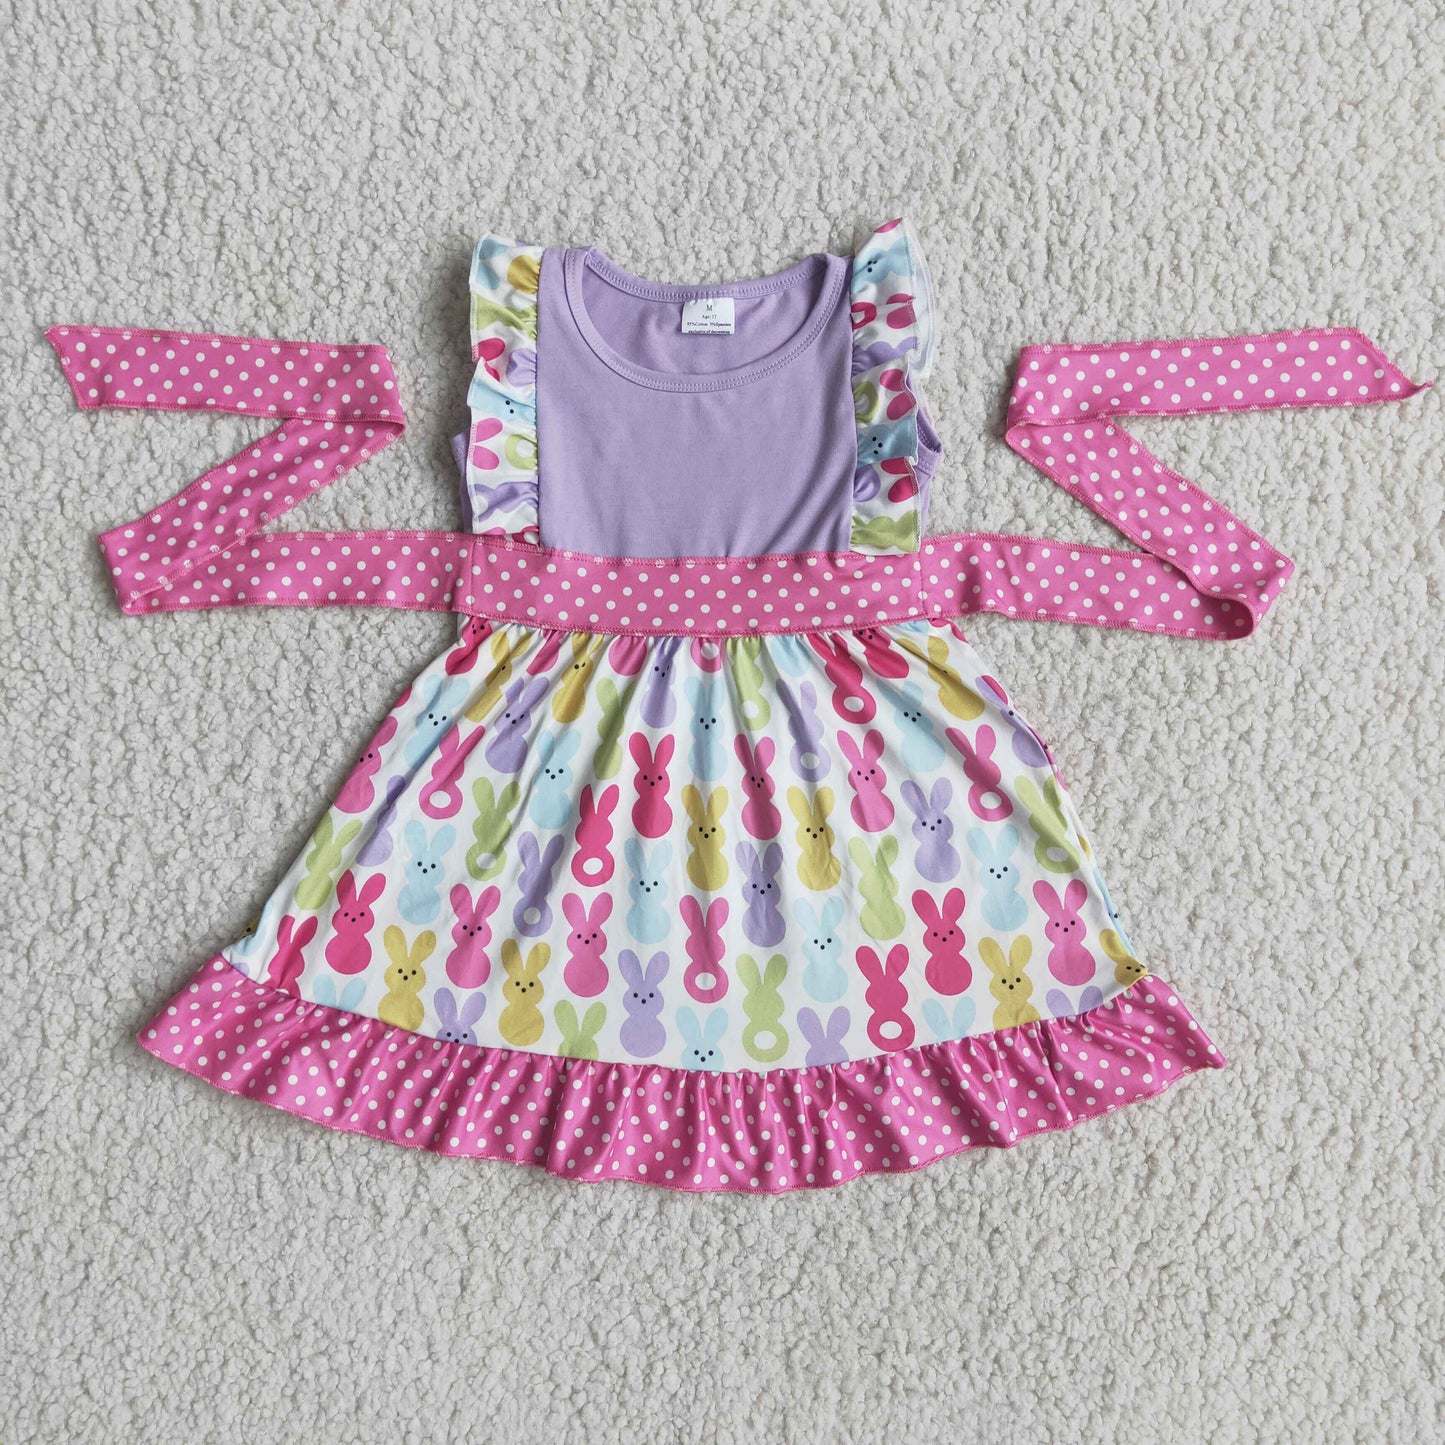 Baby girls Easter dress with sash